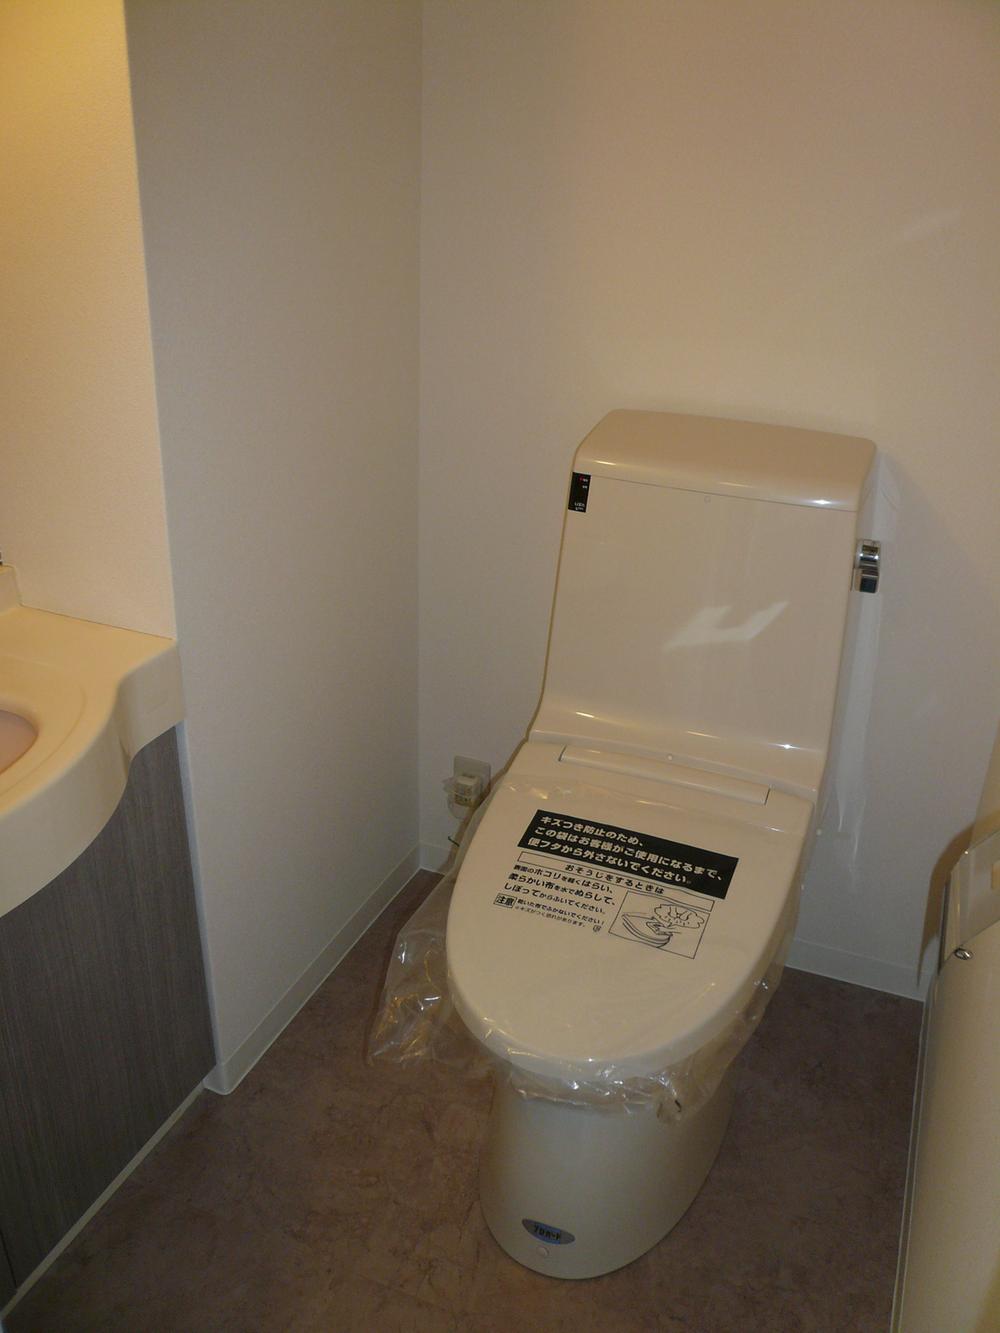 Toilet. Toilet bowl ・ Uosshuretto was replacement